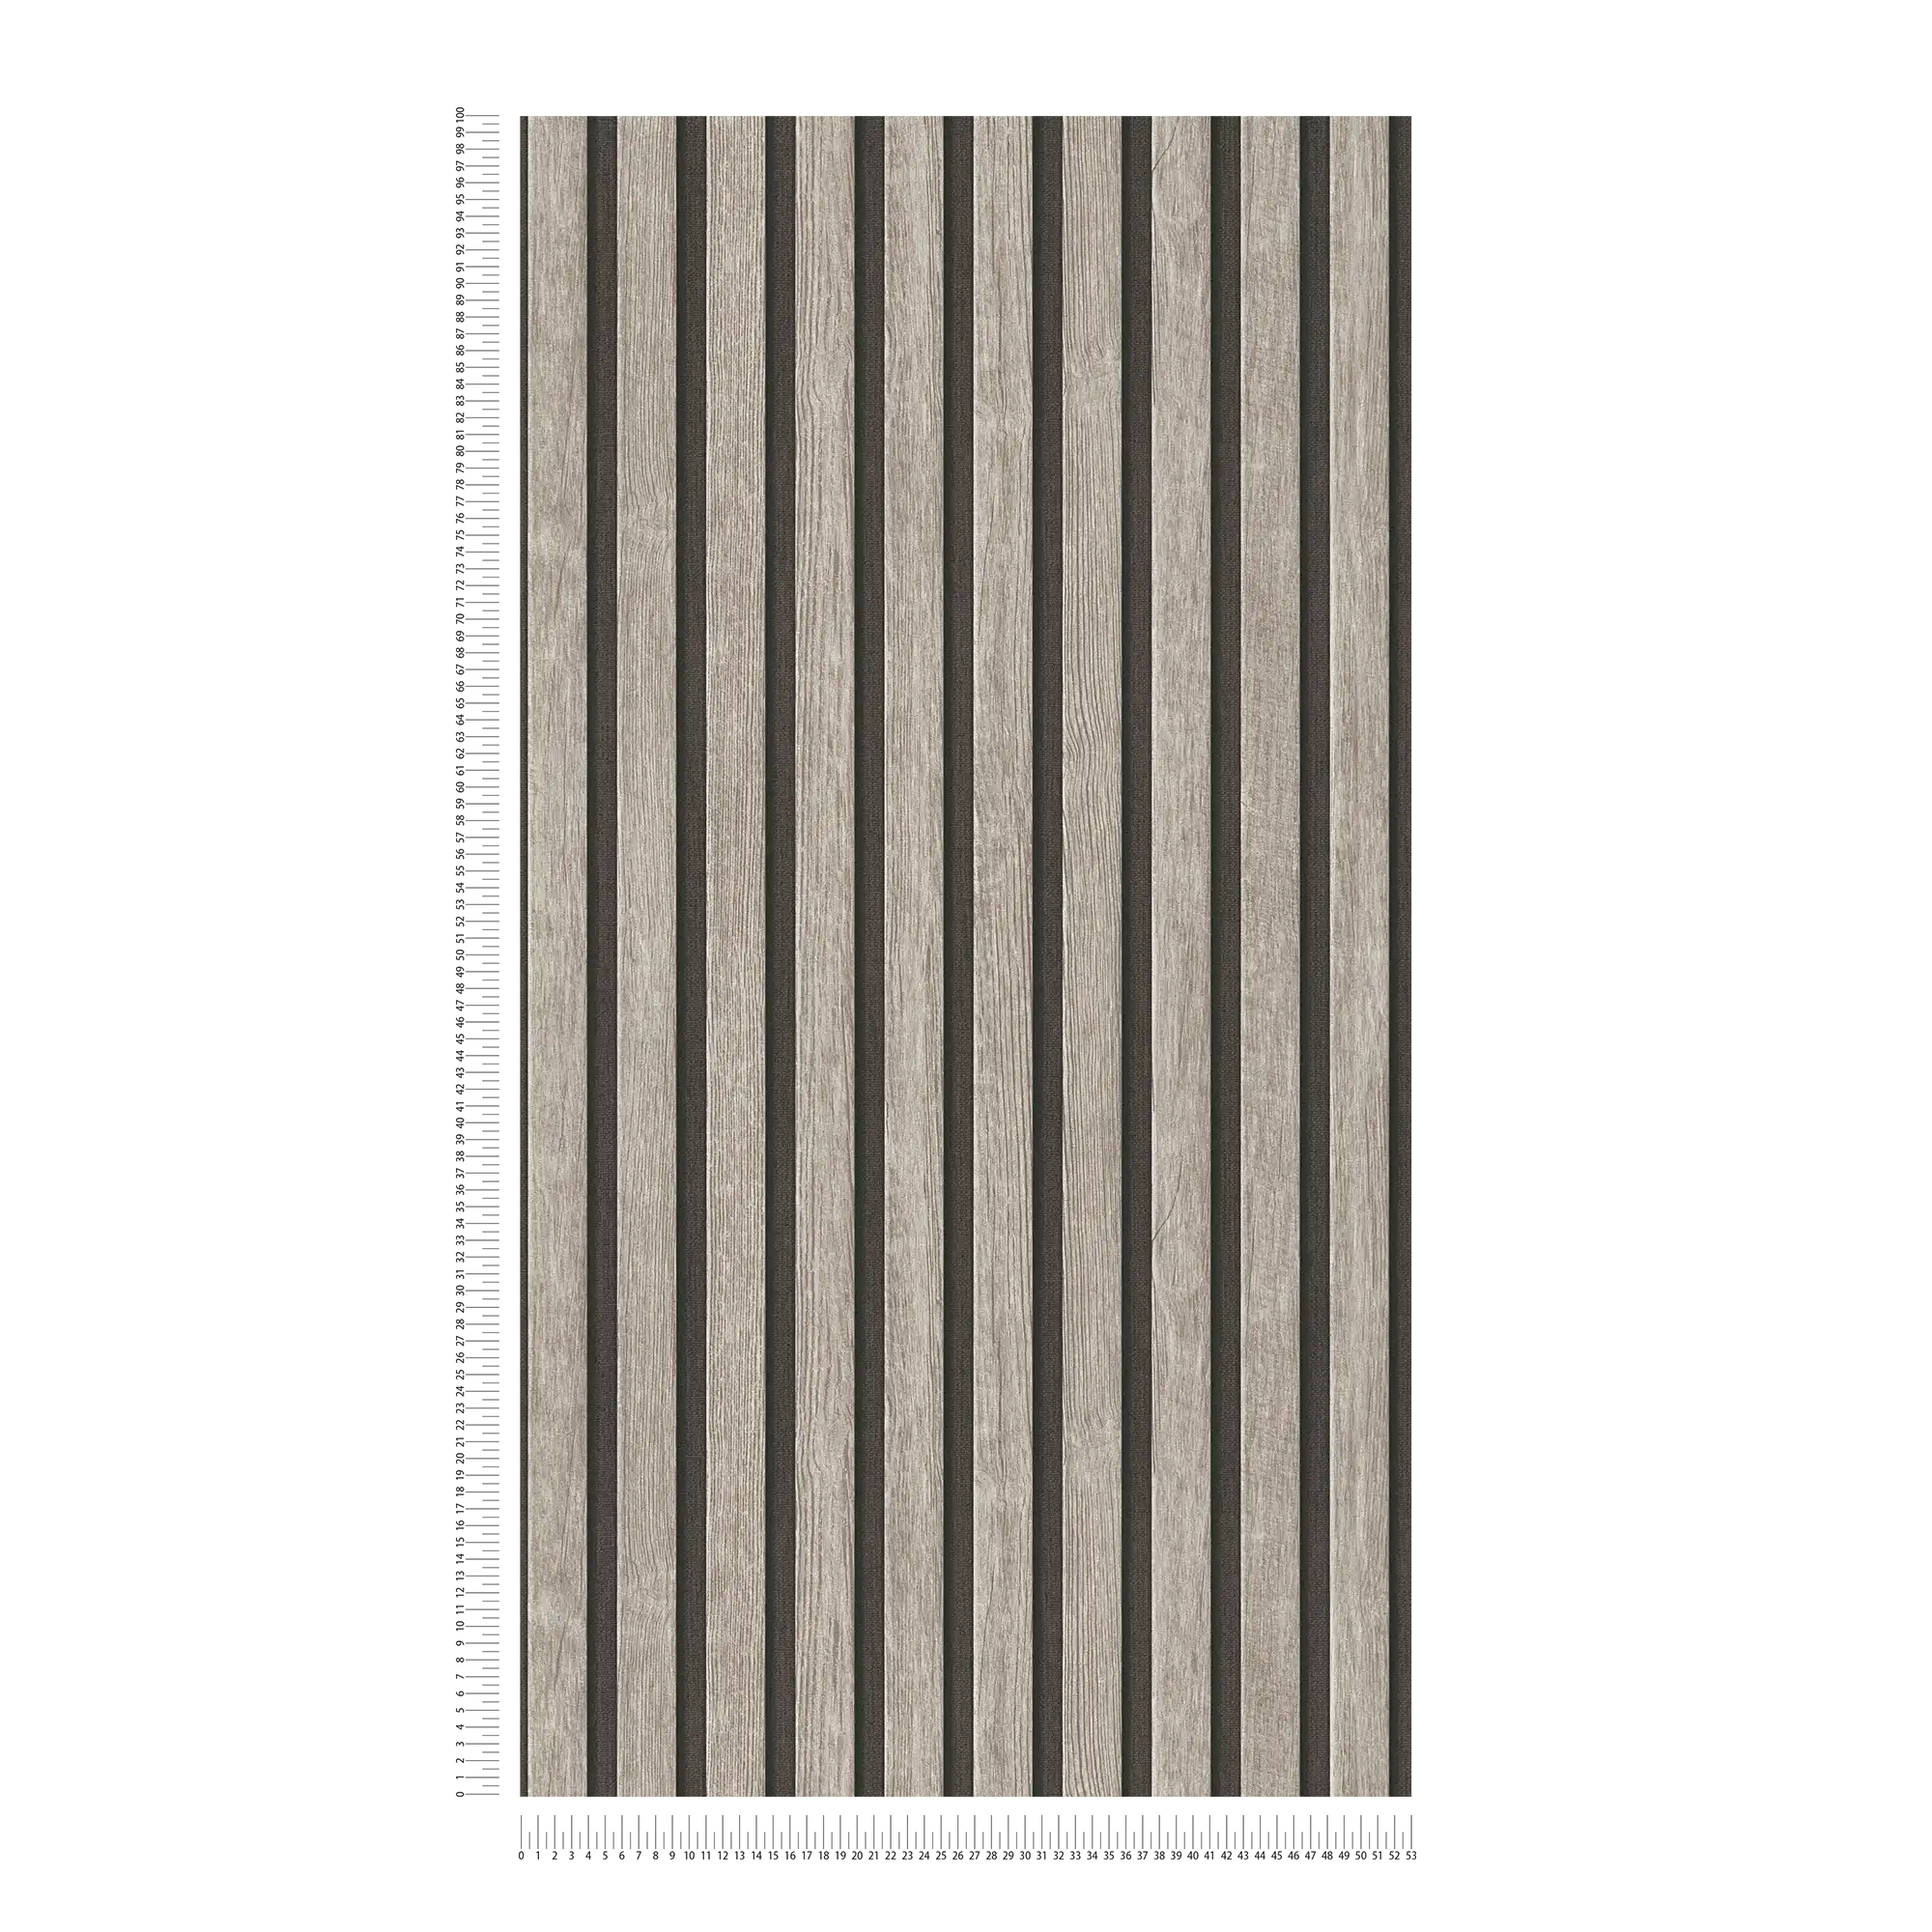             Wood panel wallpaper with fine structure - grey, black
        